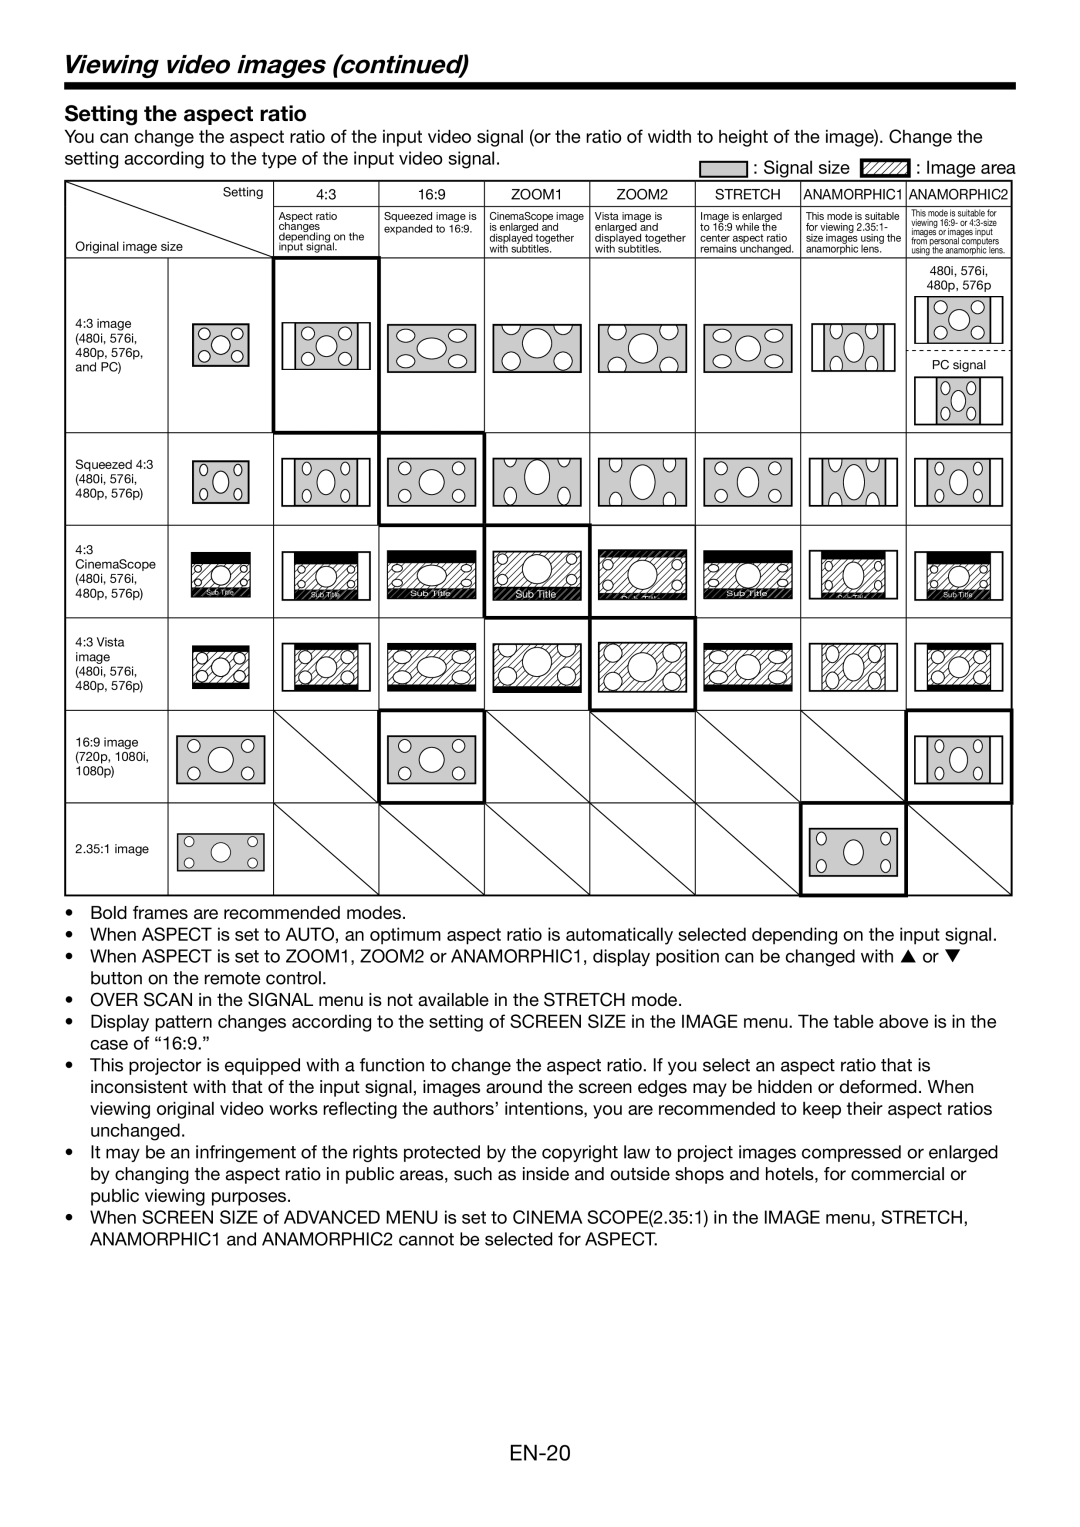 Mitsubishi Electronics HC6800 user manual Setting the aspect ratio, Viewing video images continued, EN-20 